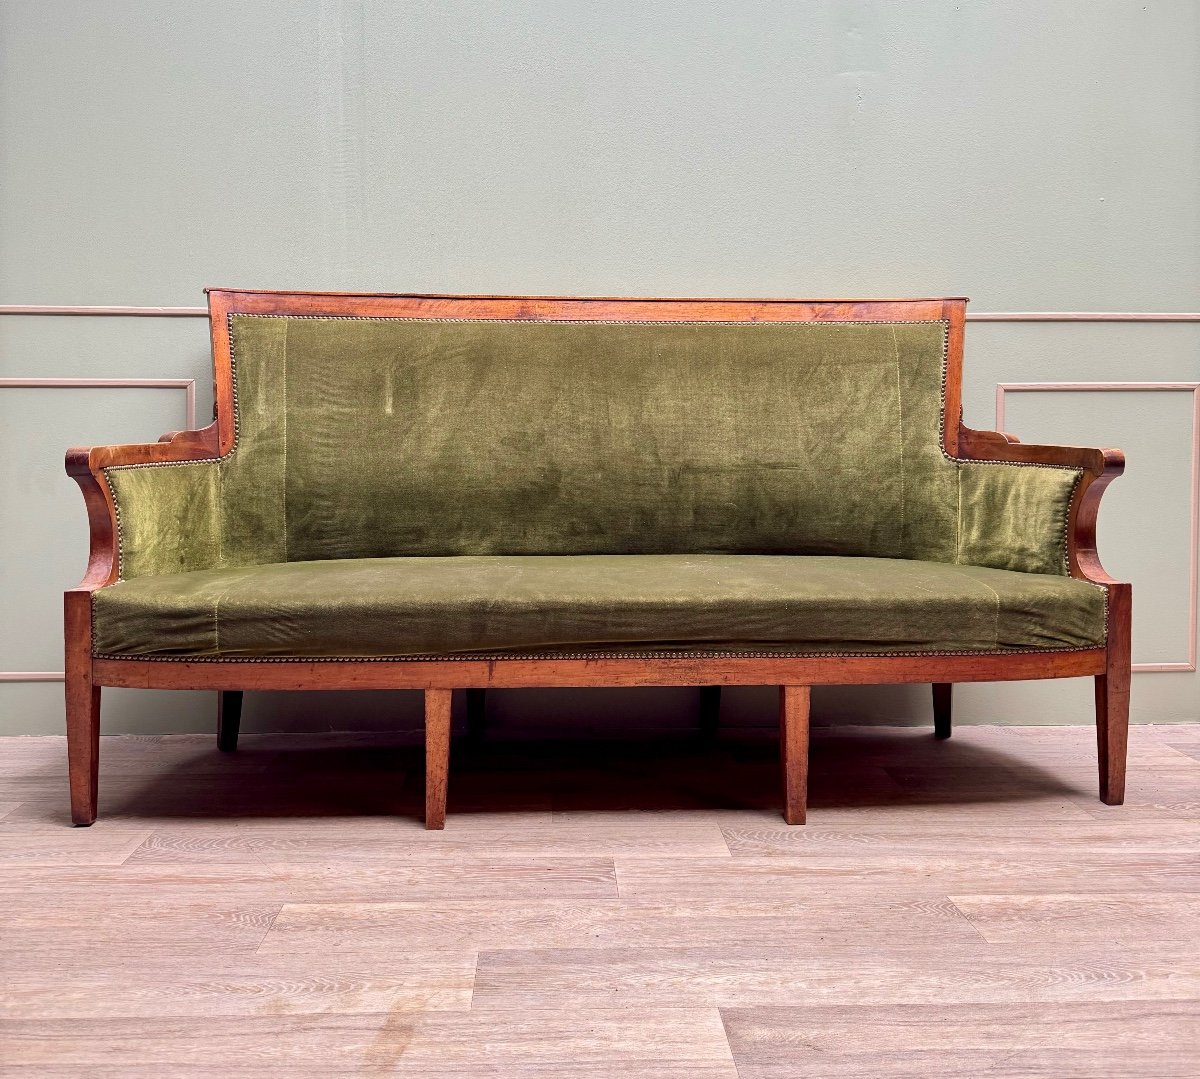 Large Officer's Sofa In Natural Wood From The Restoration Period 19th Century 